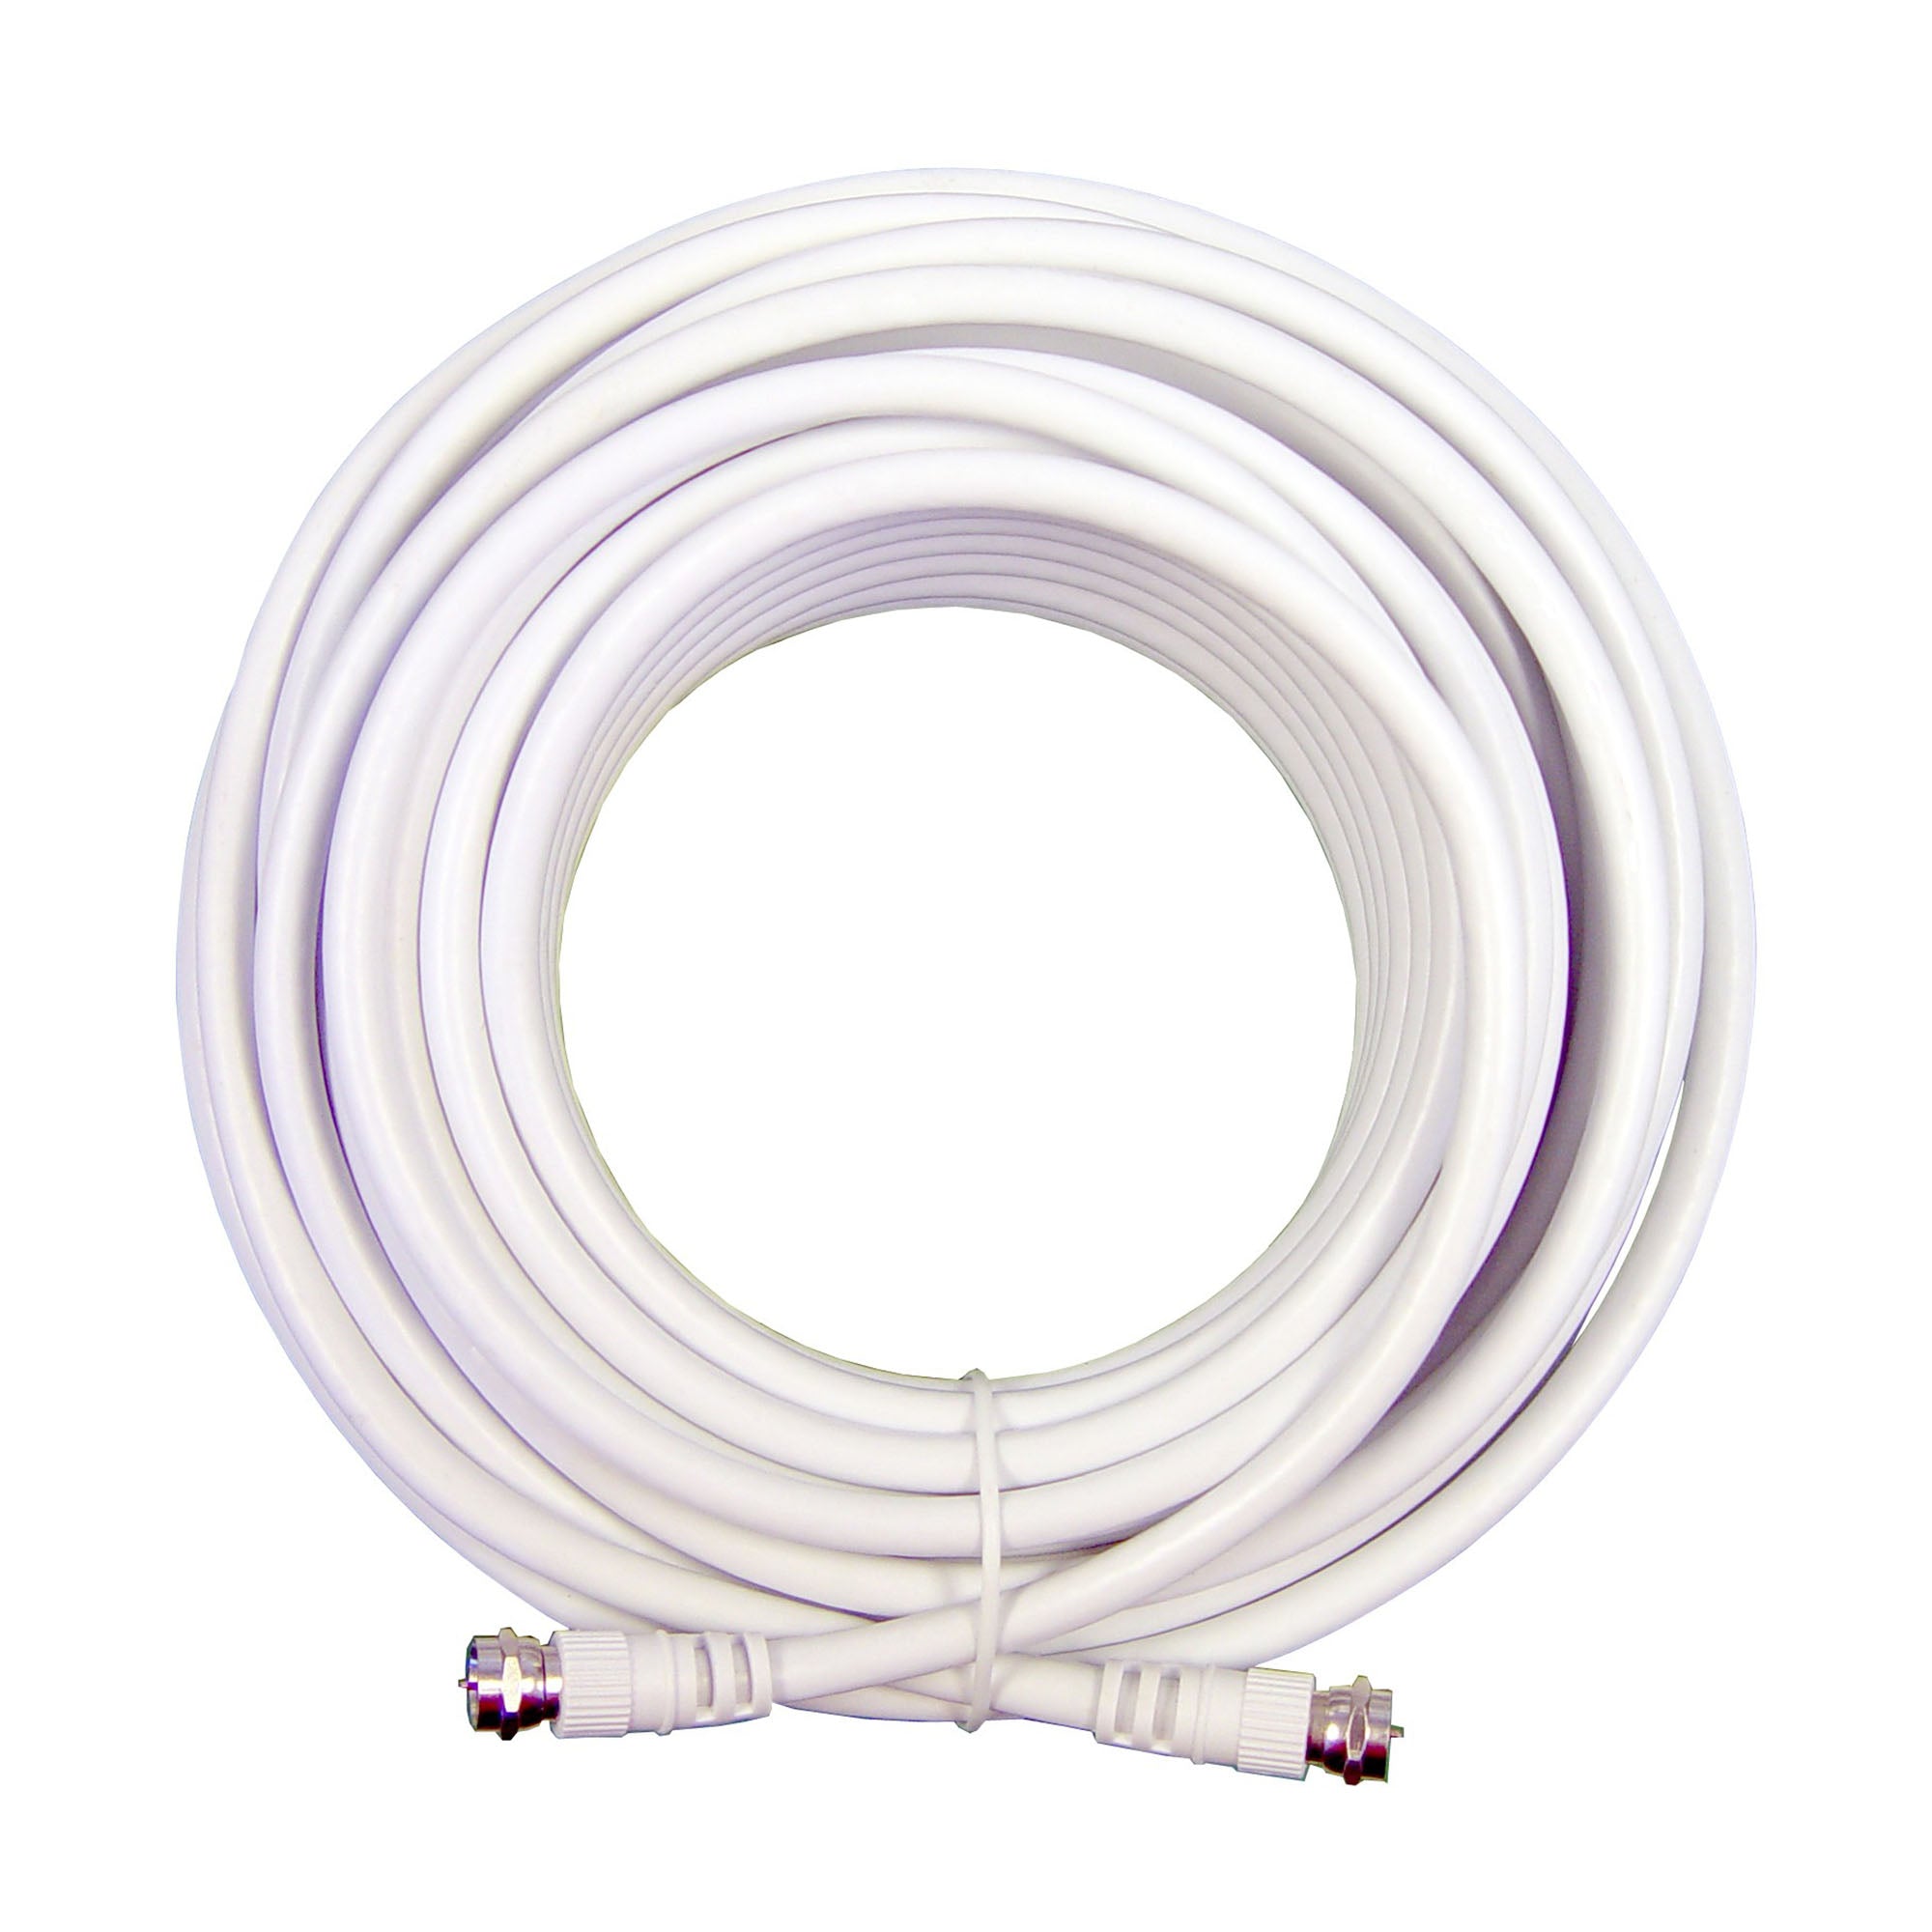 Wilson Cable 20 ft. white RG6 low loss coax cable